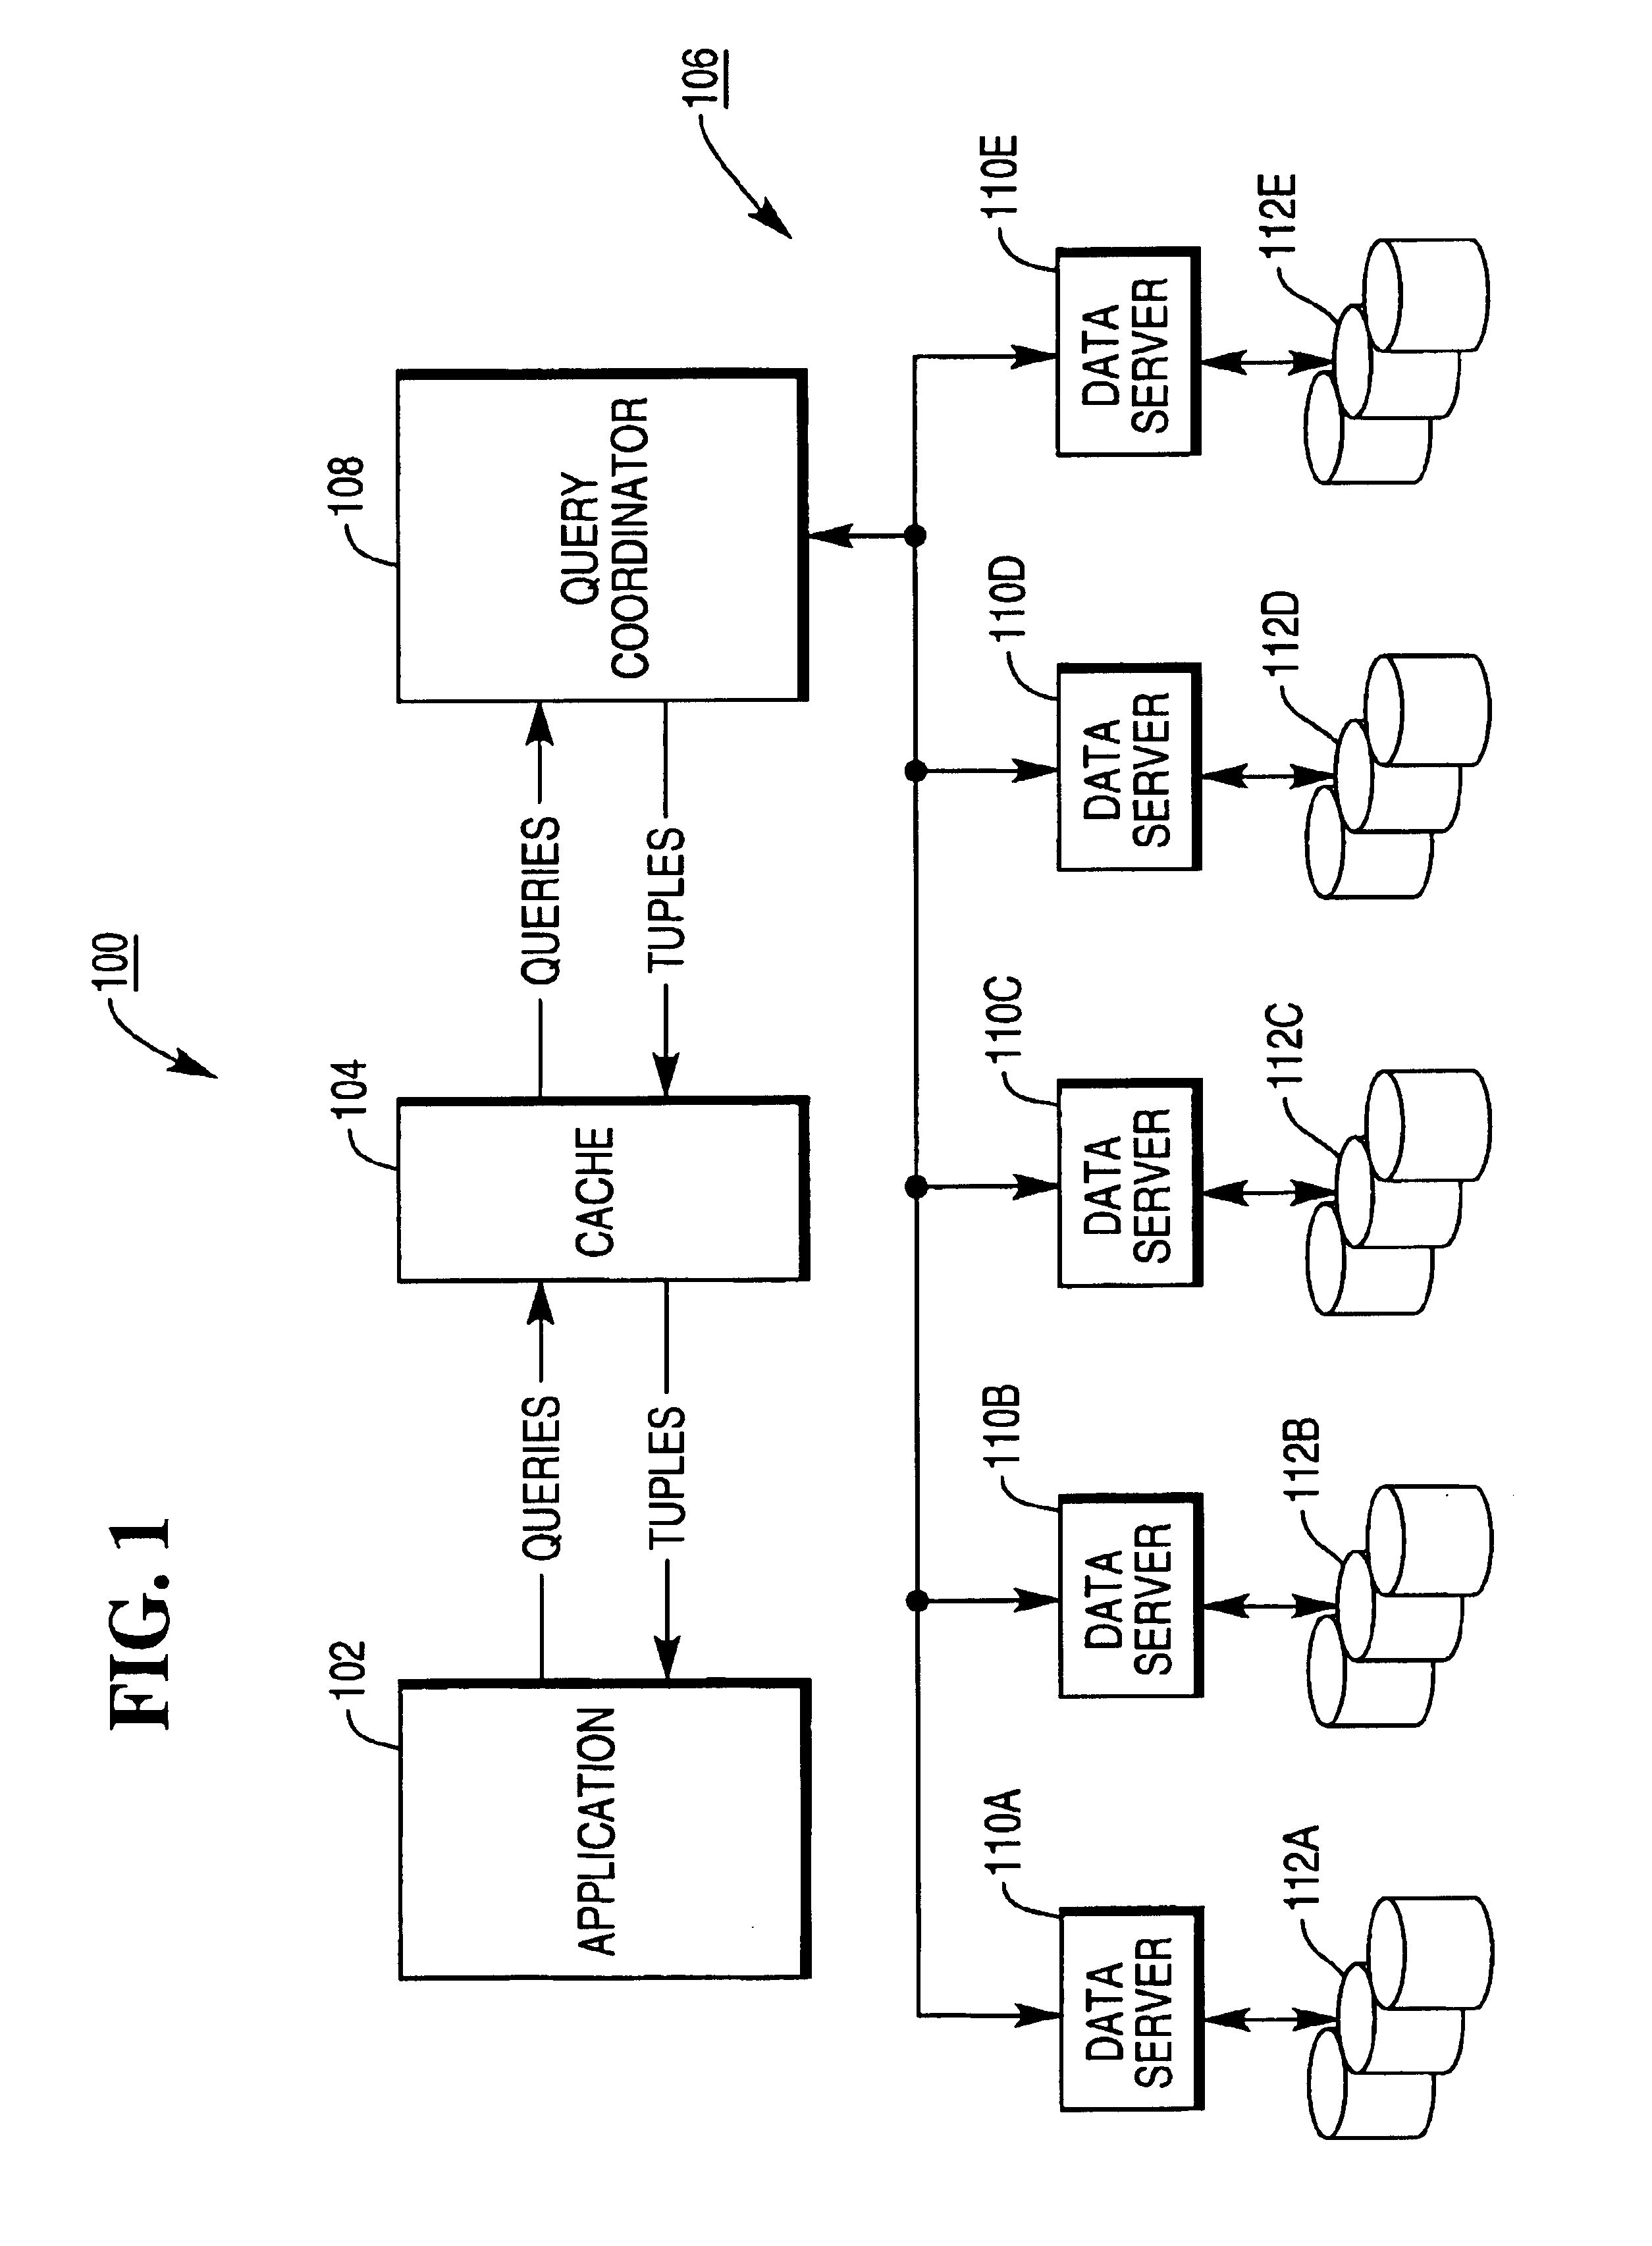 Method for determining the computability of data for an active multi-dimensional cache in a relational database management system